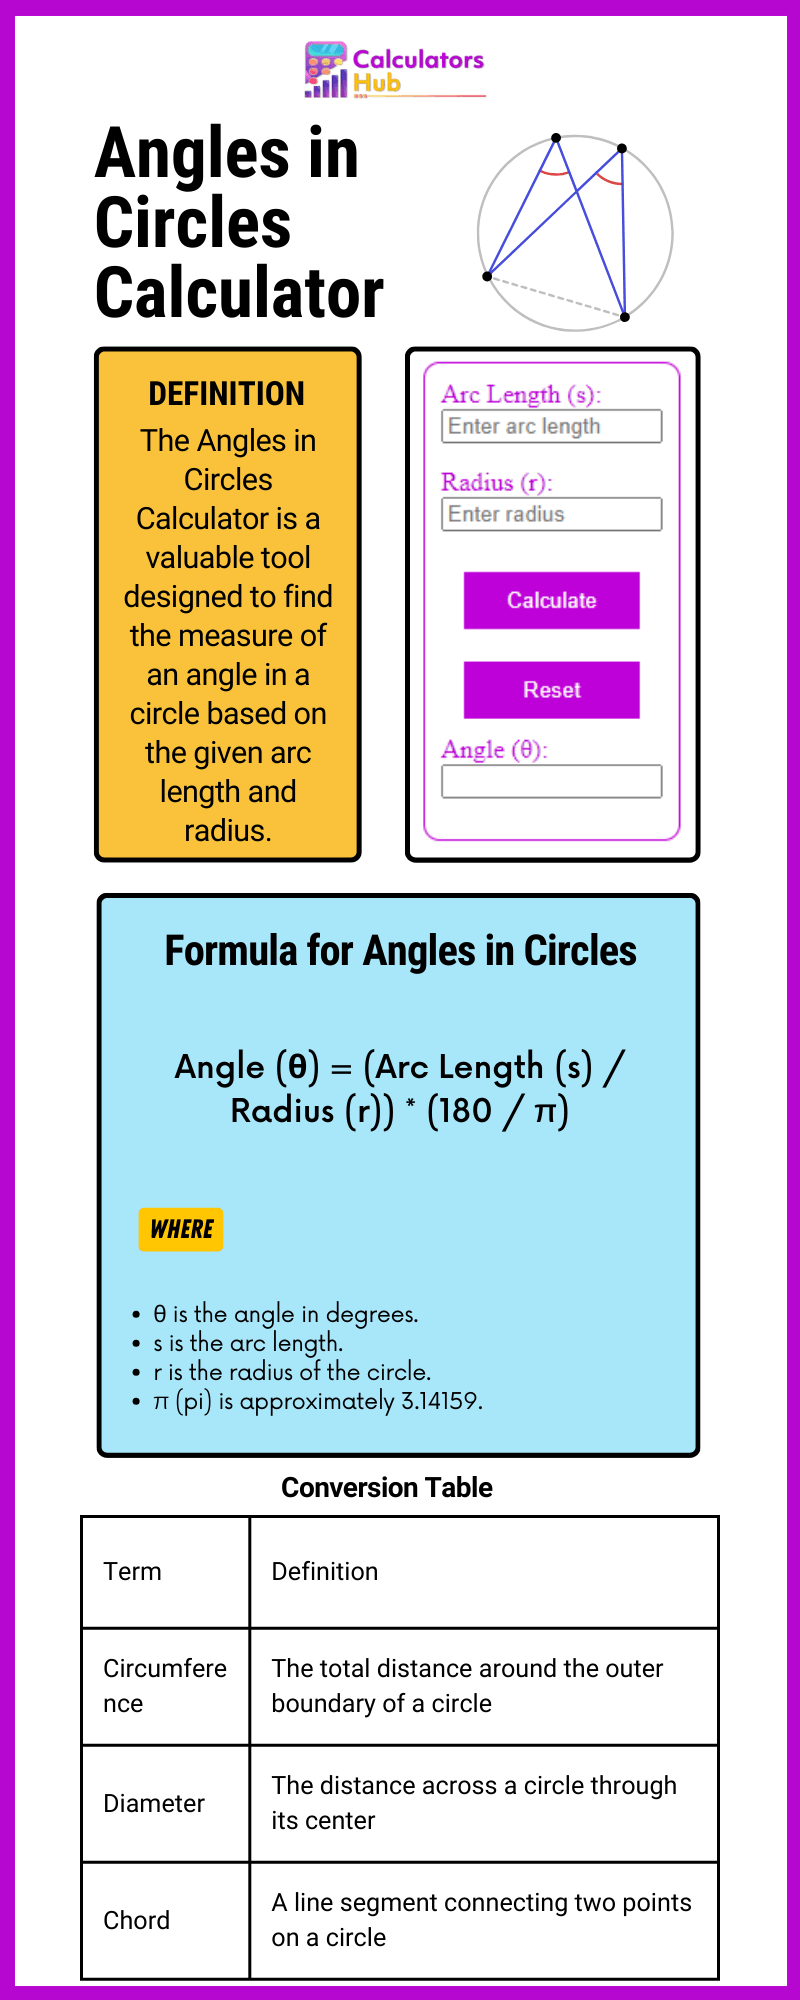 Angles in Circles Calculator